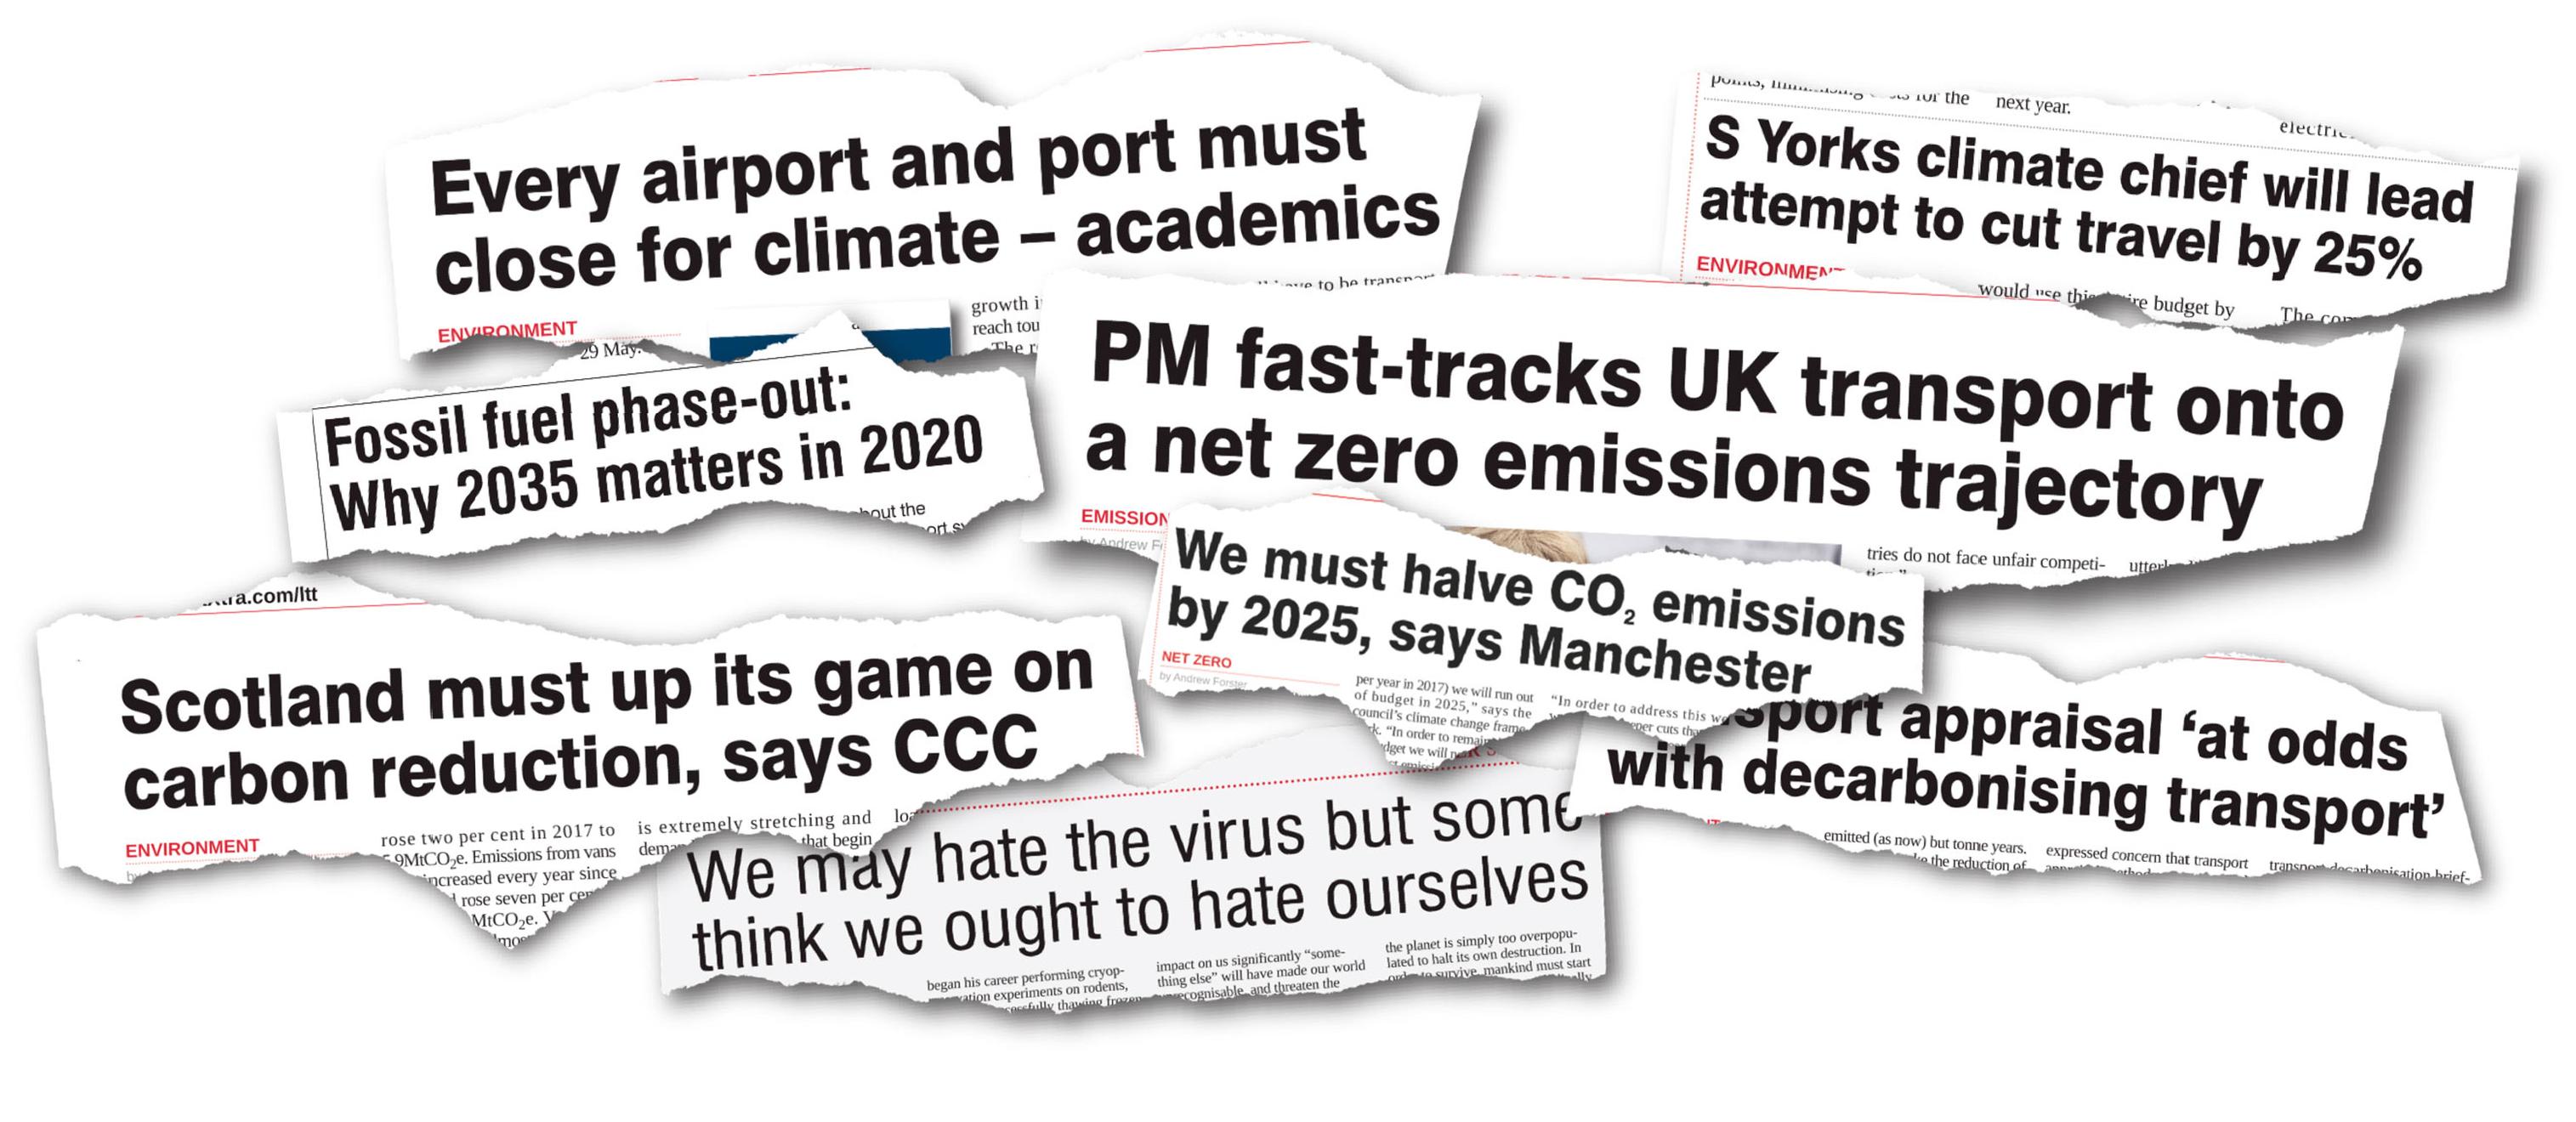 Just some of the content expressing different responses to climate change that LTT has published in recent months